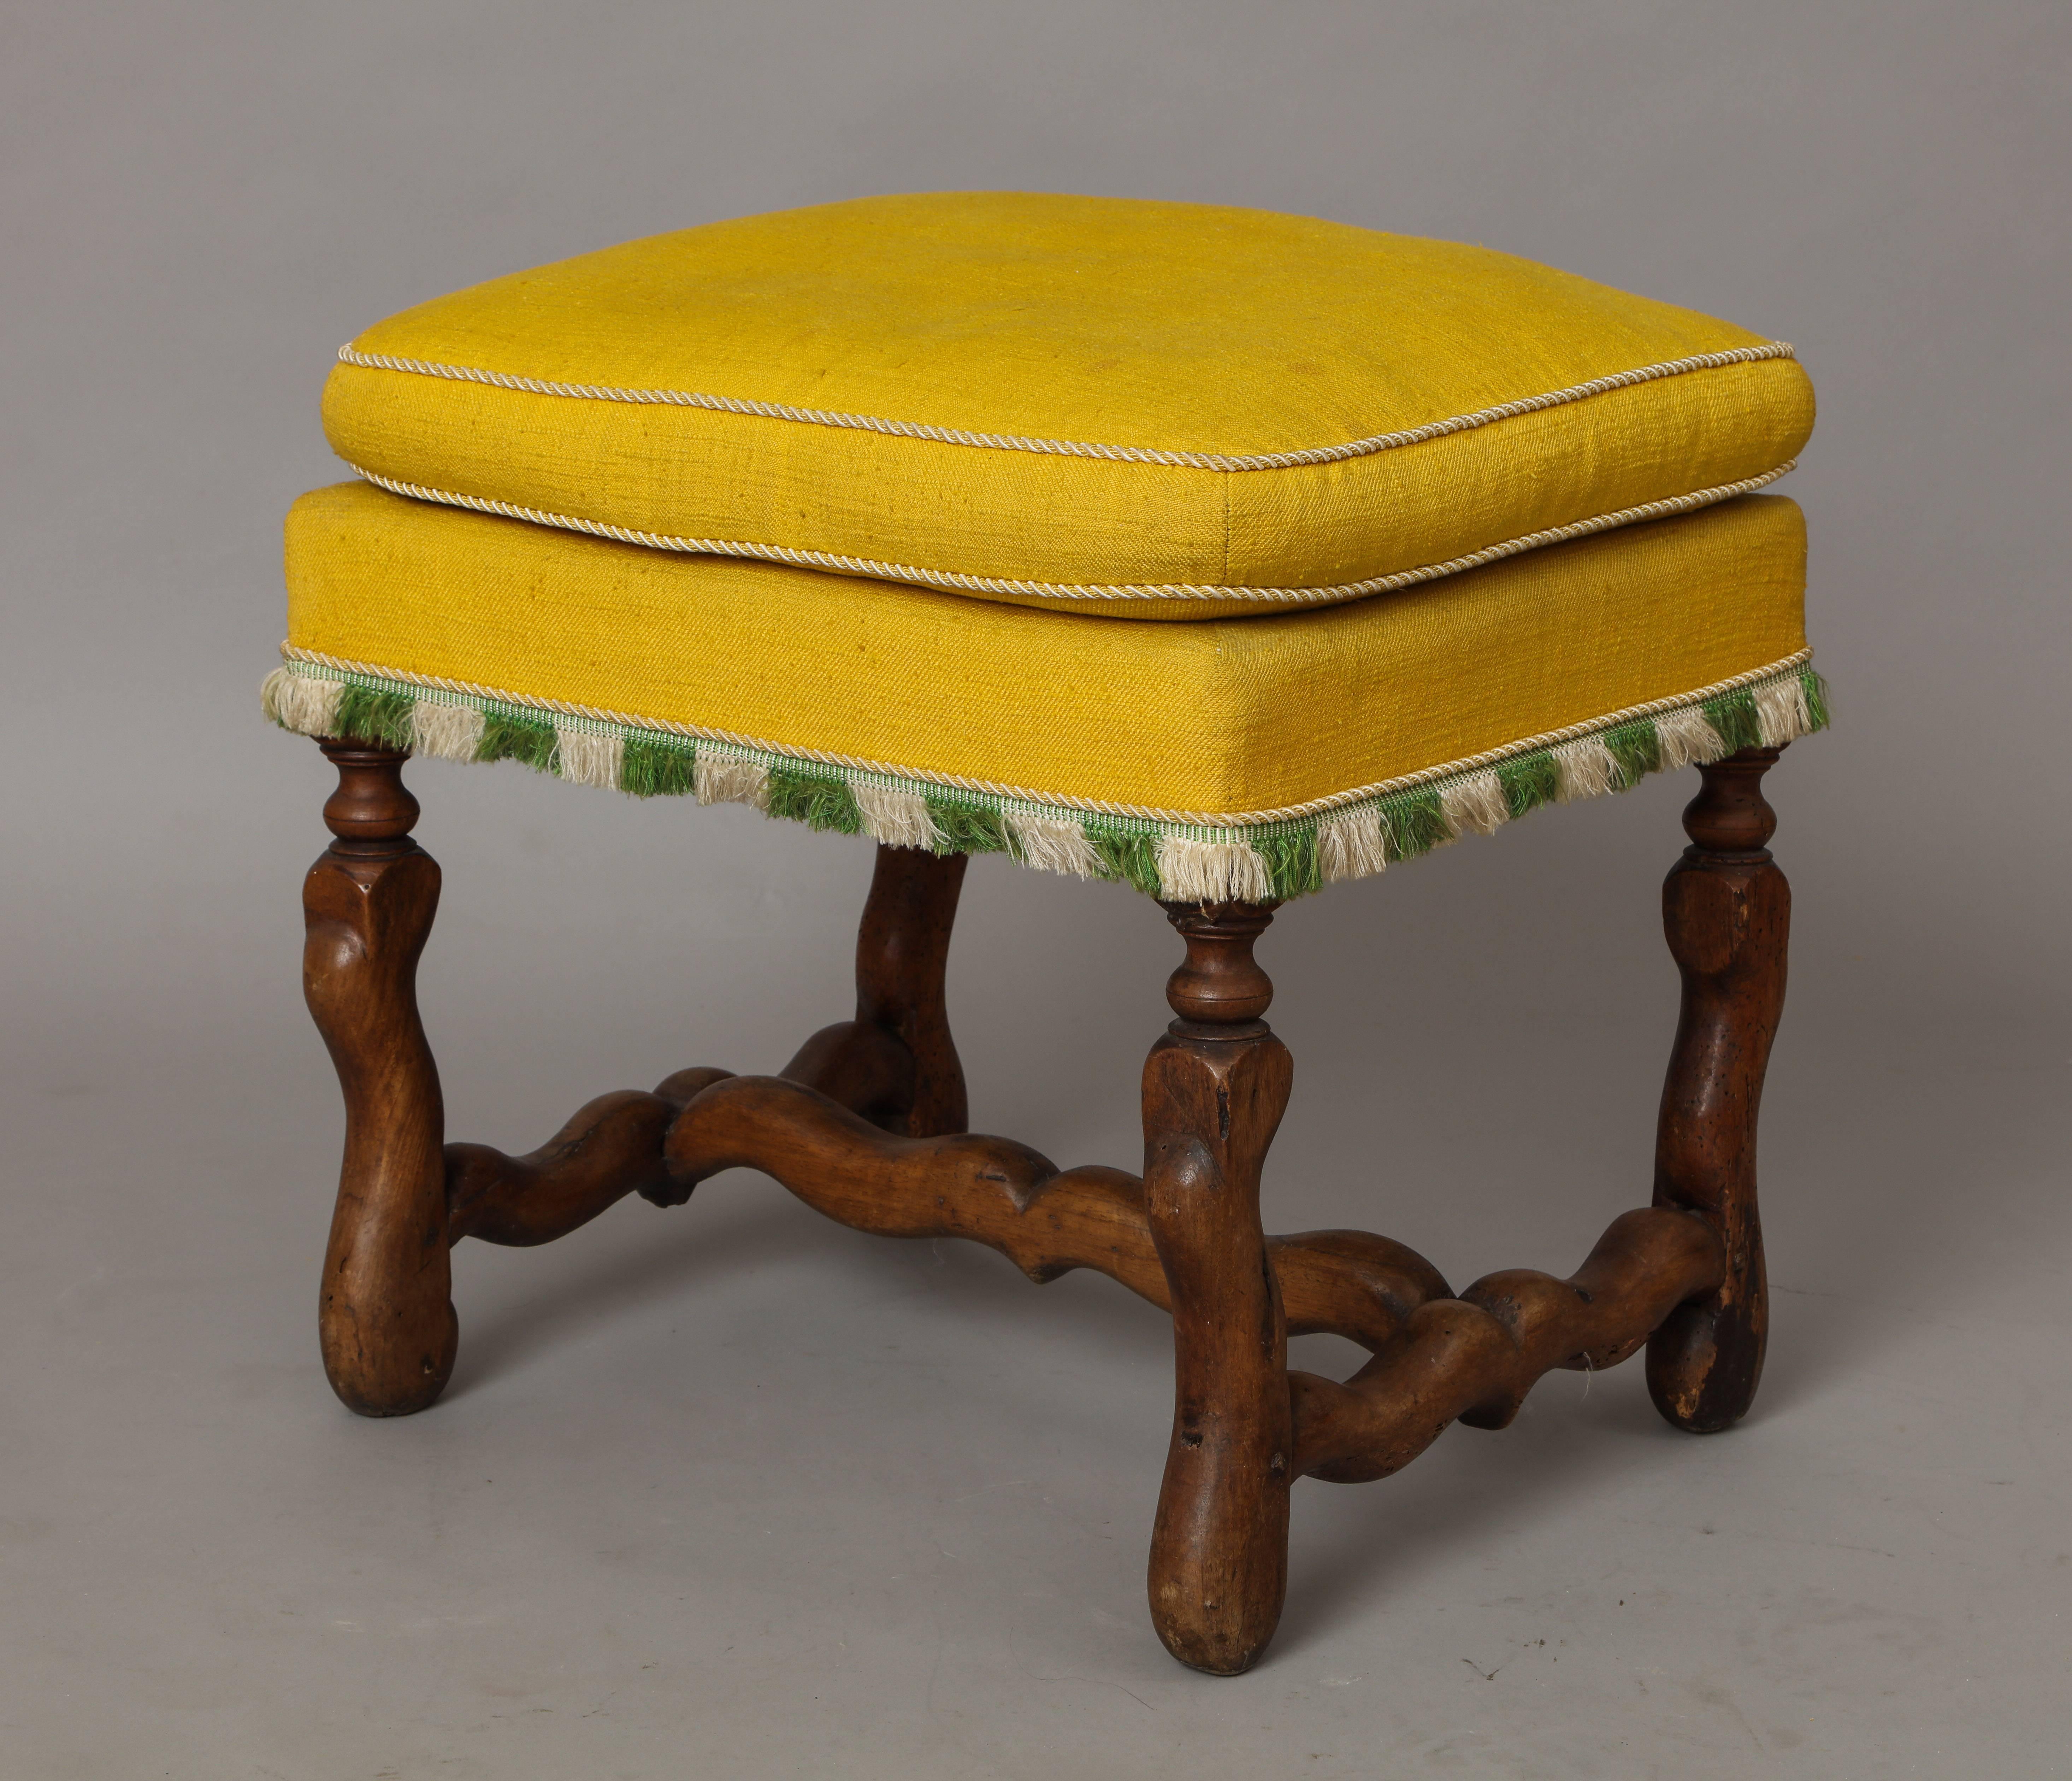 Baroque Louis XIII French Walnut Stool with ‘Os De Mouton’ Legs and Stretcher